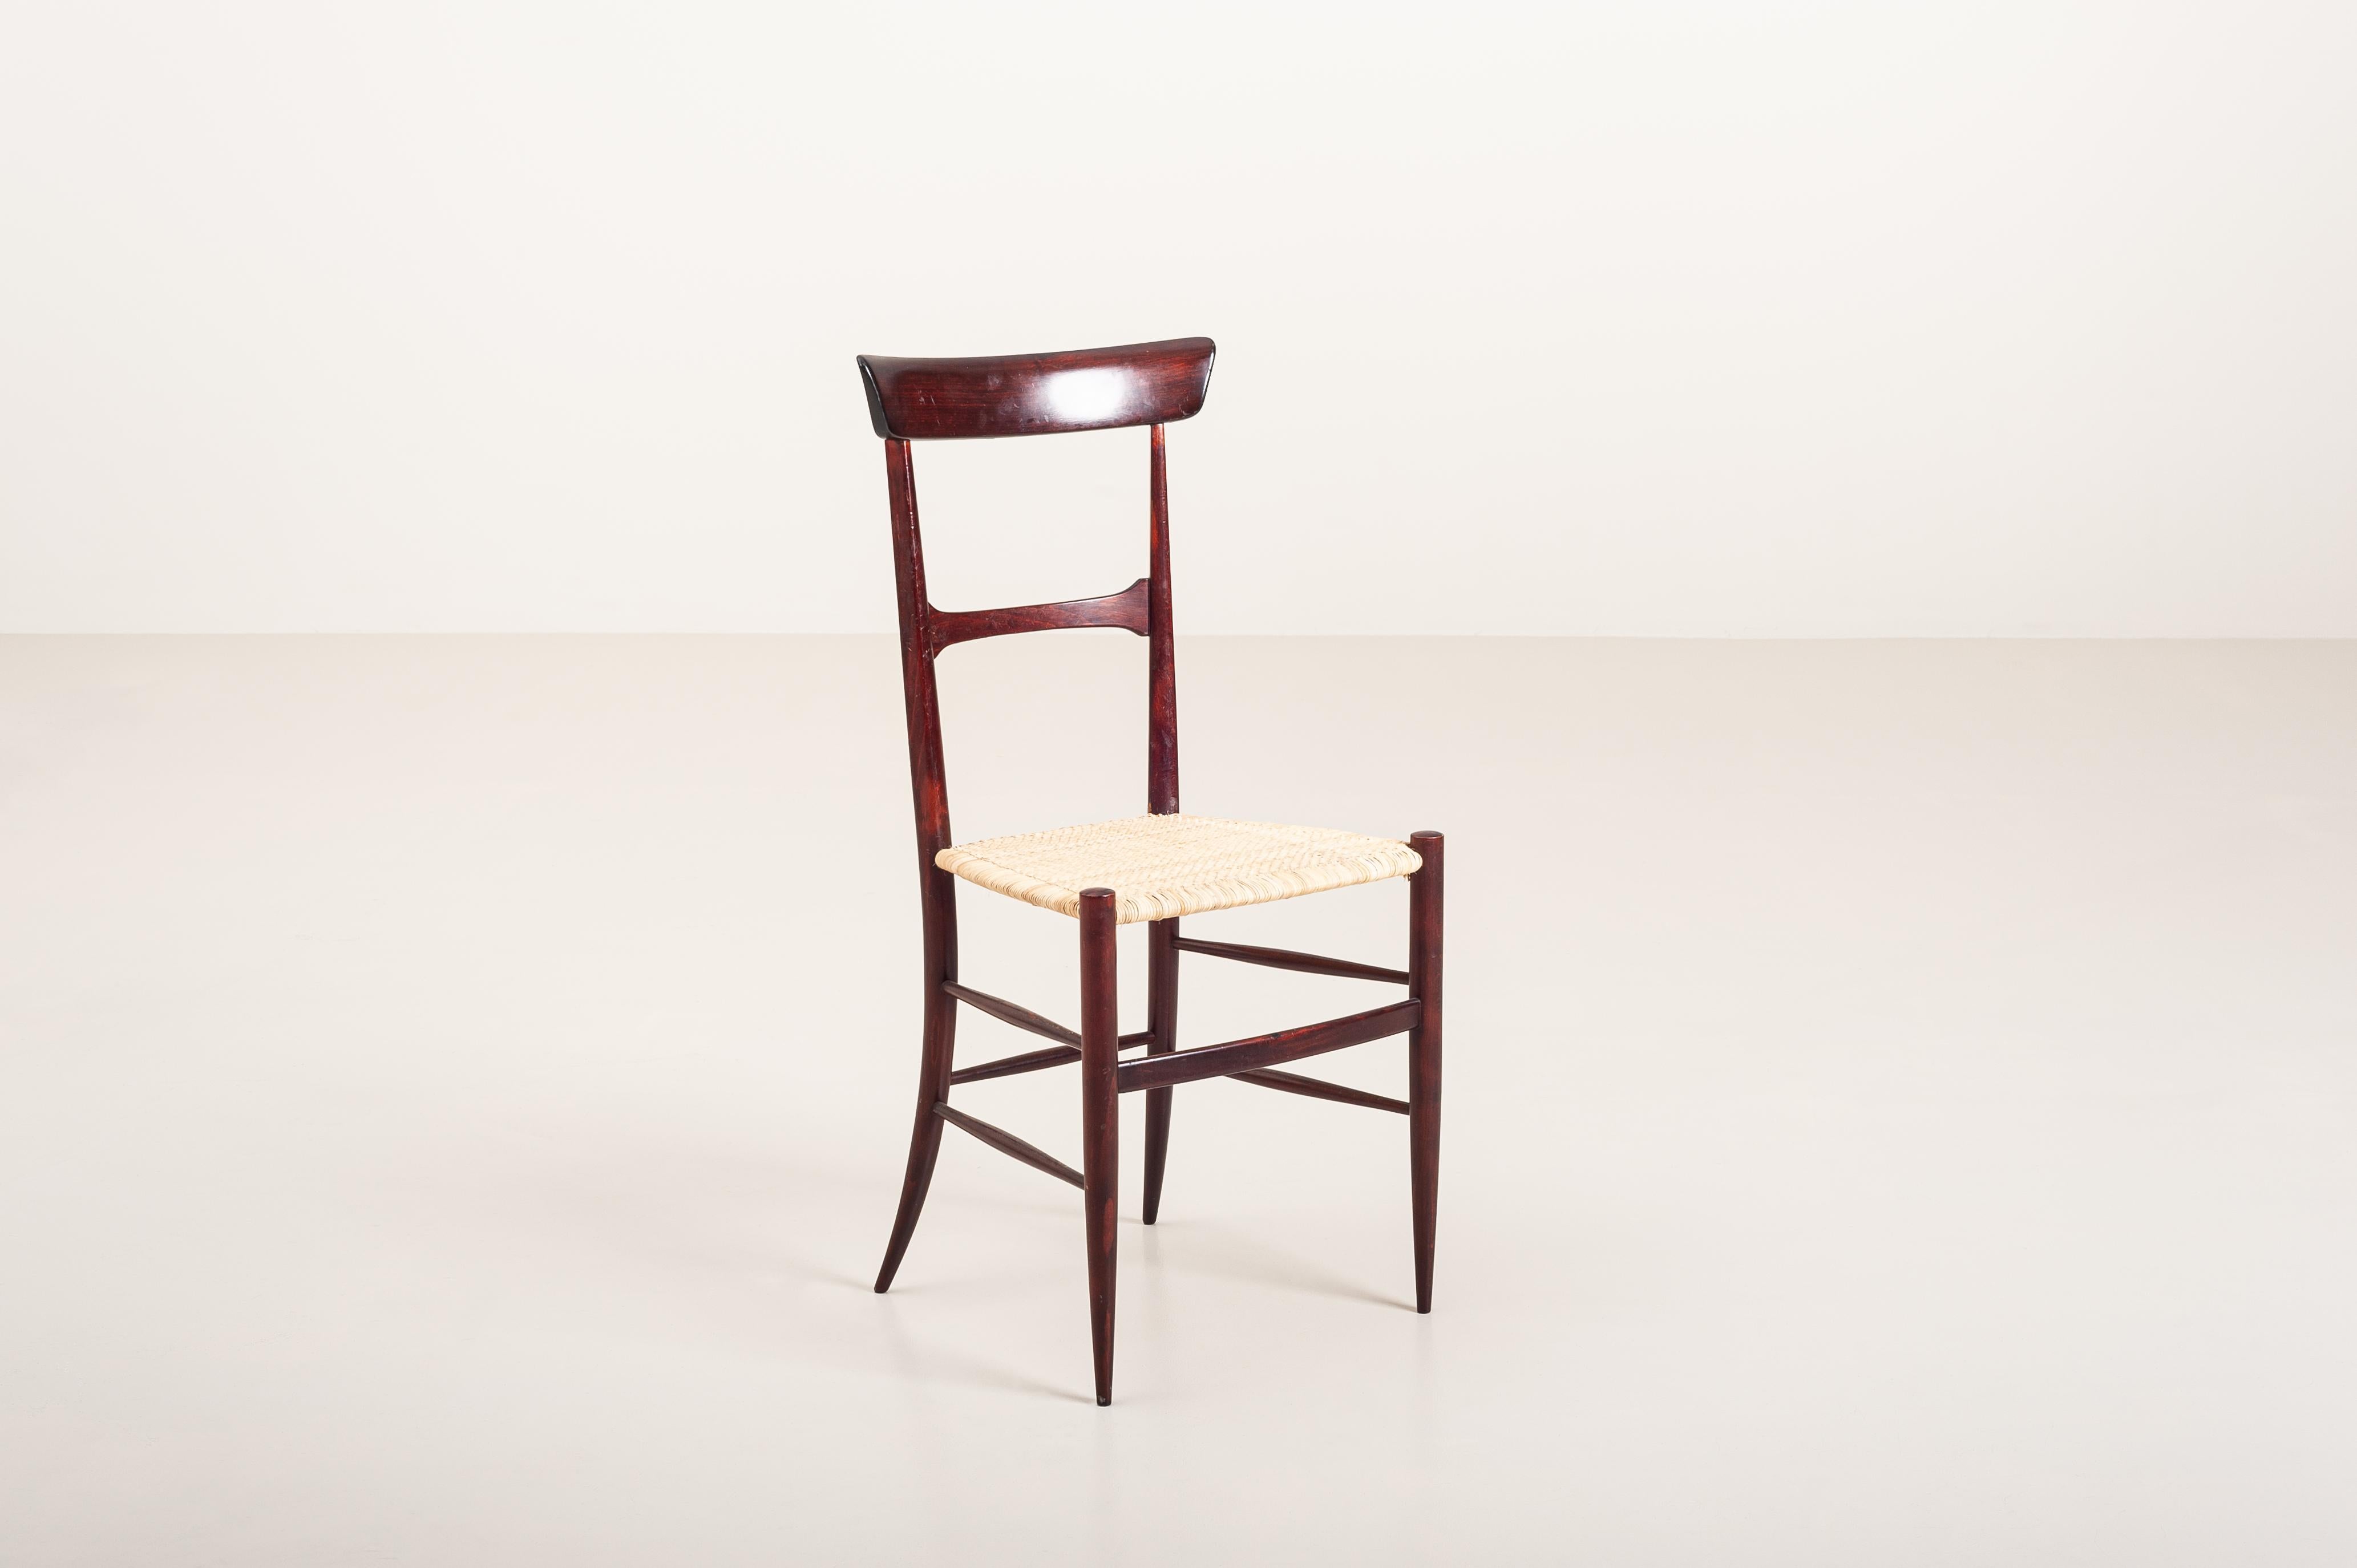 A very rare set of six dining chairs ''Leggerissima'' (ultralight) model designed by Emanuele Rambaldi and manufactured by Figli di Sanguineti G.B. 

Made of beech painted in a rosewood essence, this model has a frame which weight just 1,65 kg